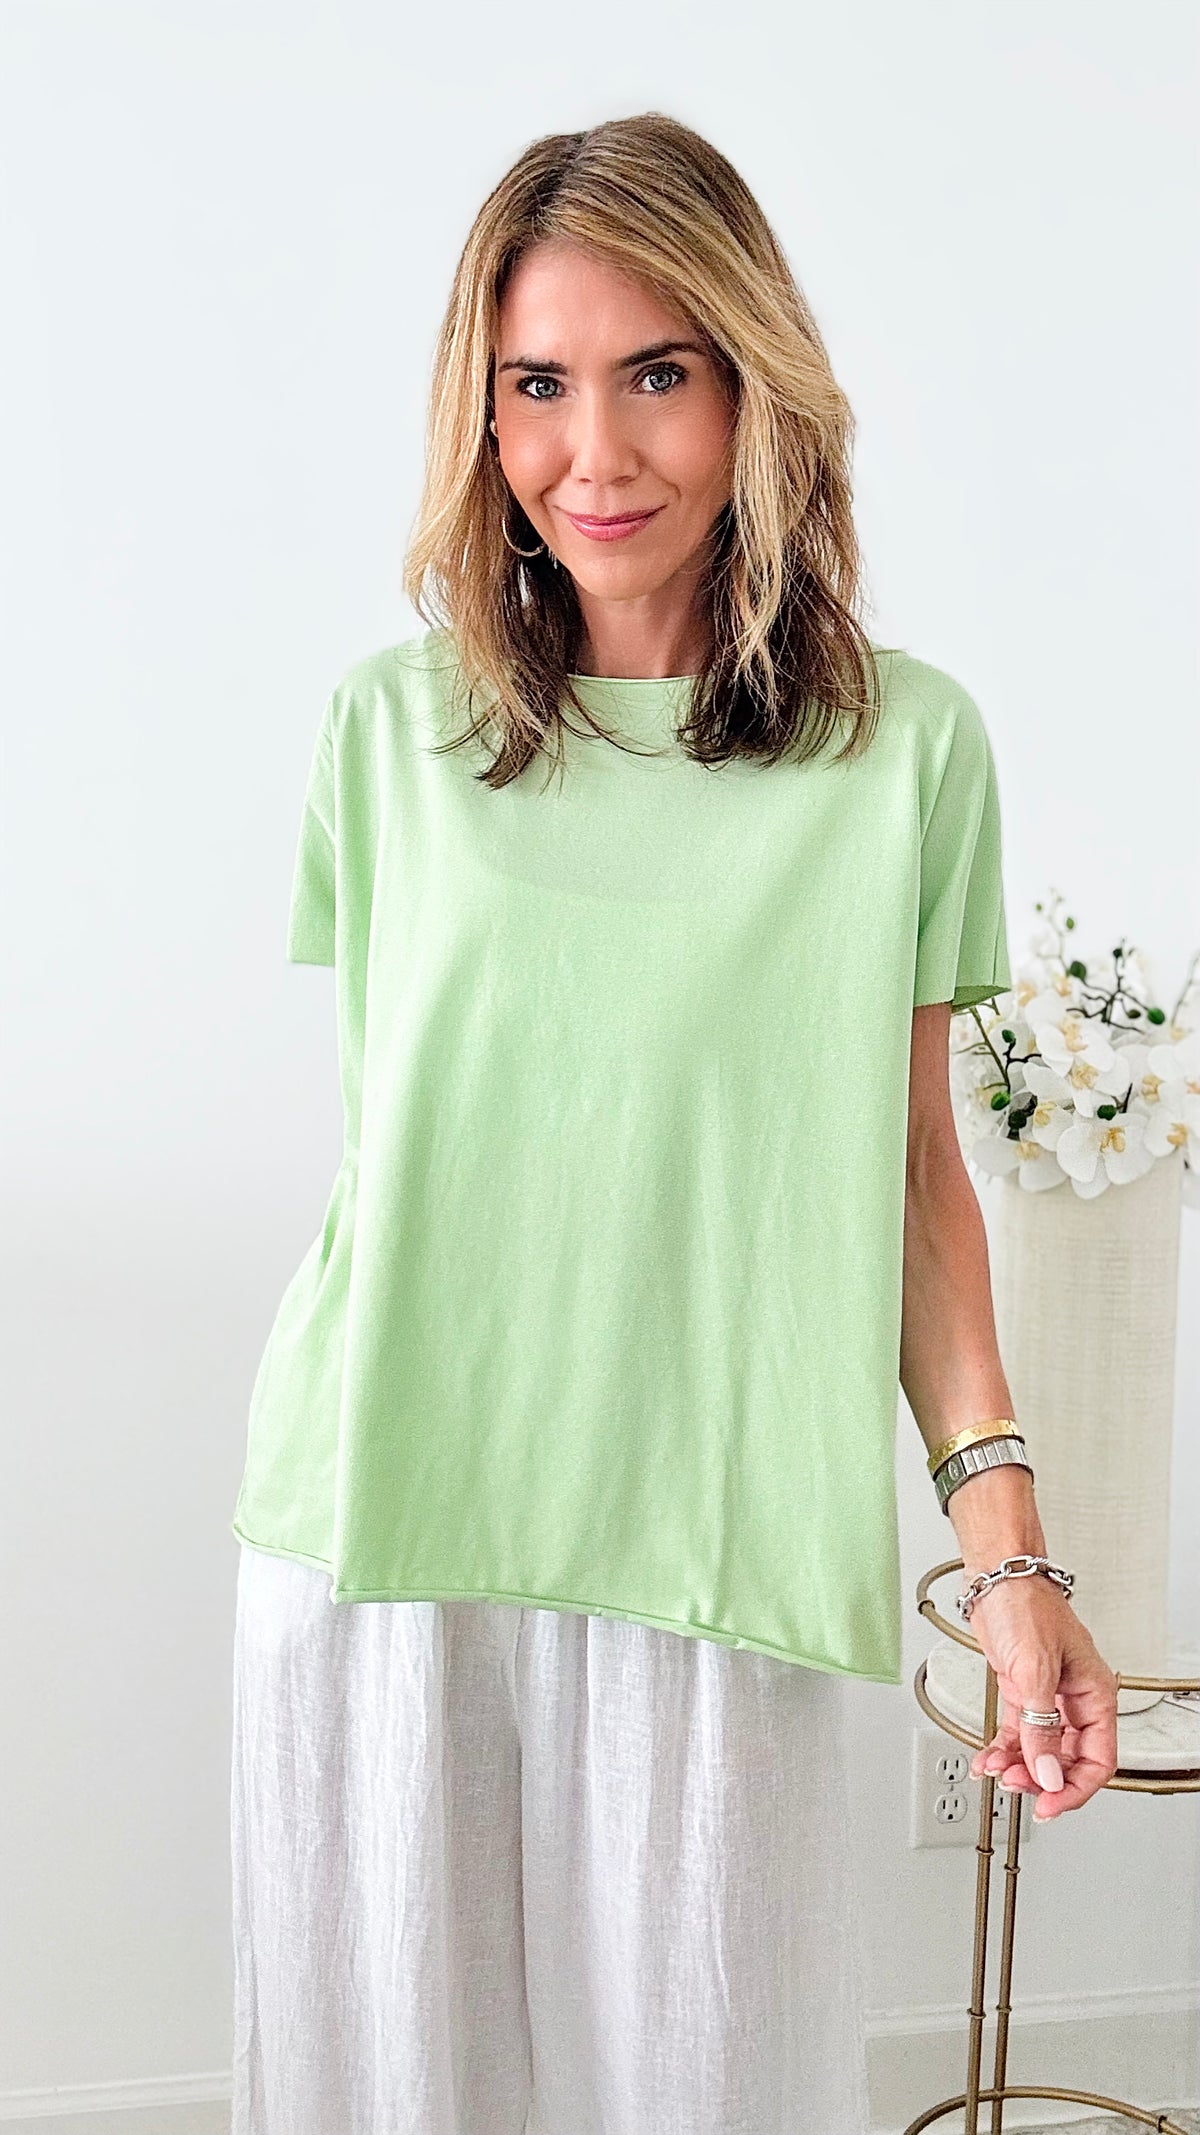 Easy Breezy Italian tee - Lime-110 Short Sleeve Tops-Germany-Coastal Bloom Boutique, find the trendiest versions of the popular styles and looks Located in Indialantic, FL